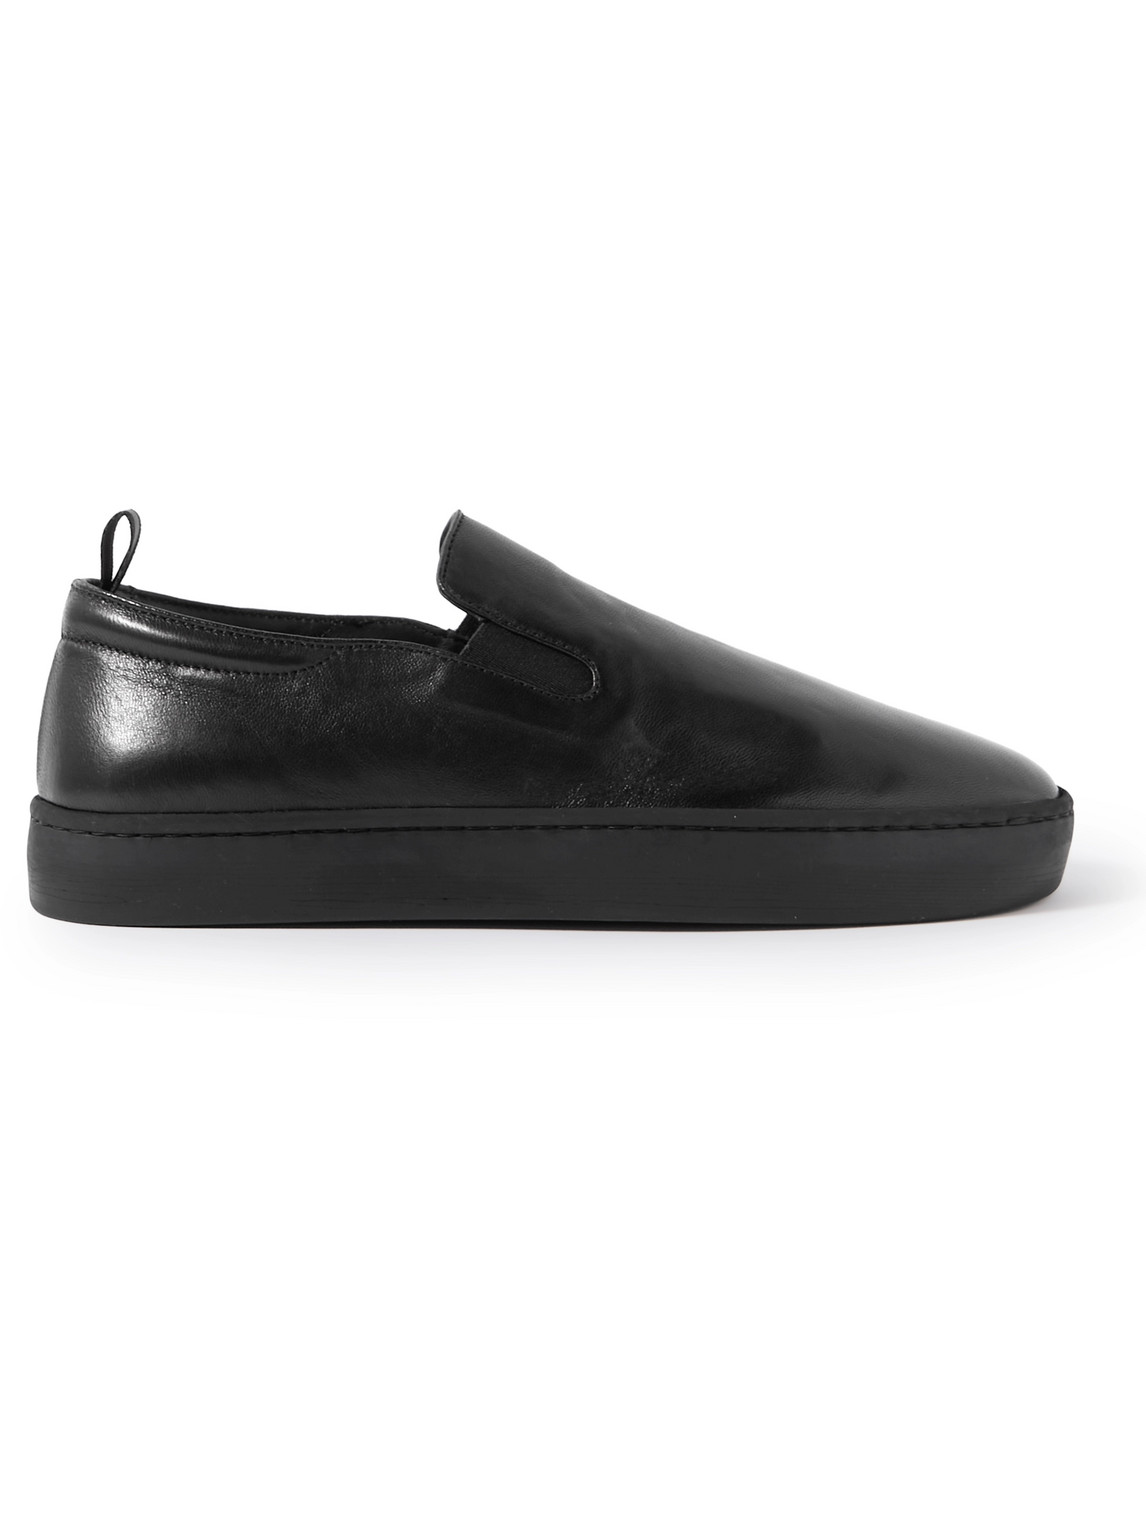 Officine Creative Bug Leather Slip-On Sneakers